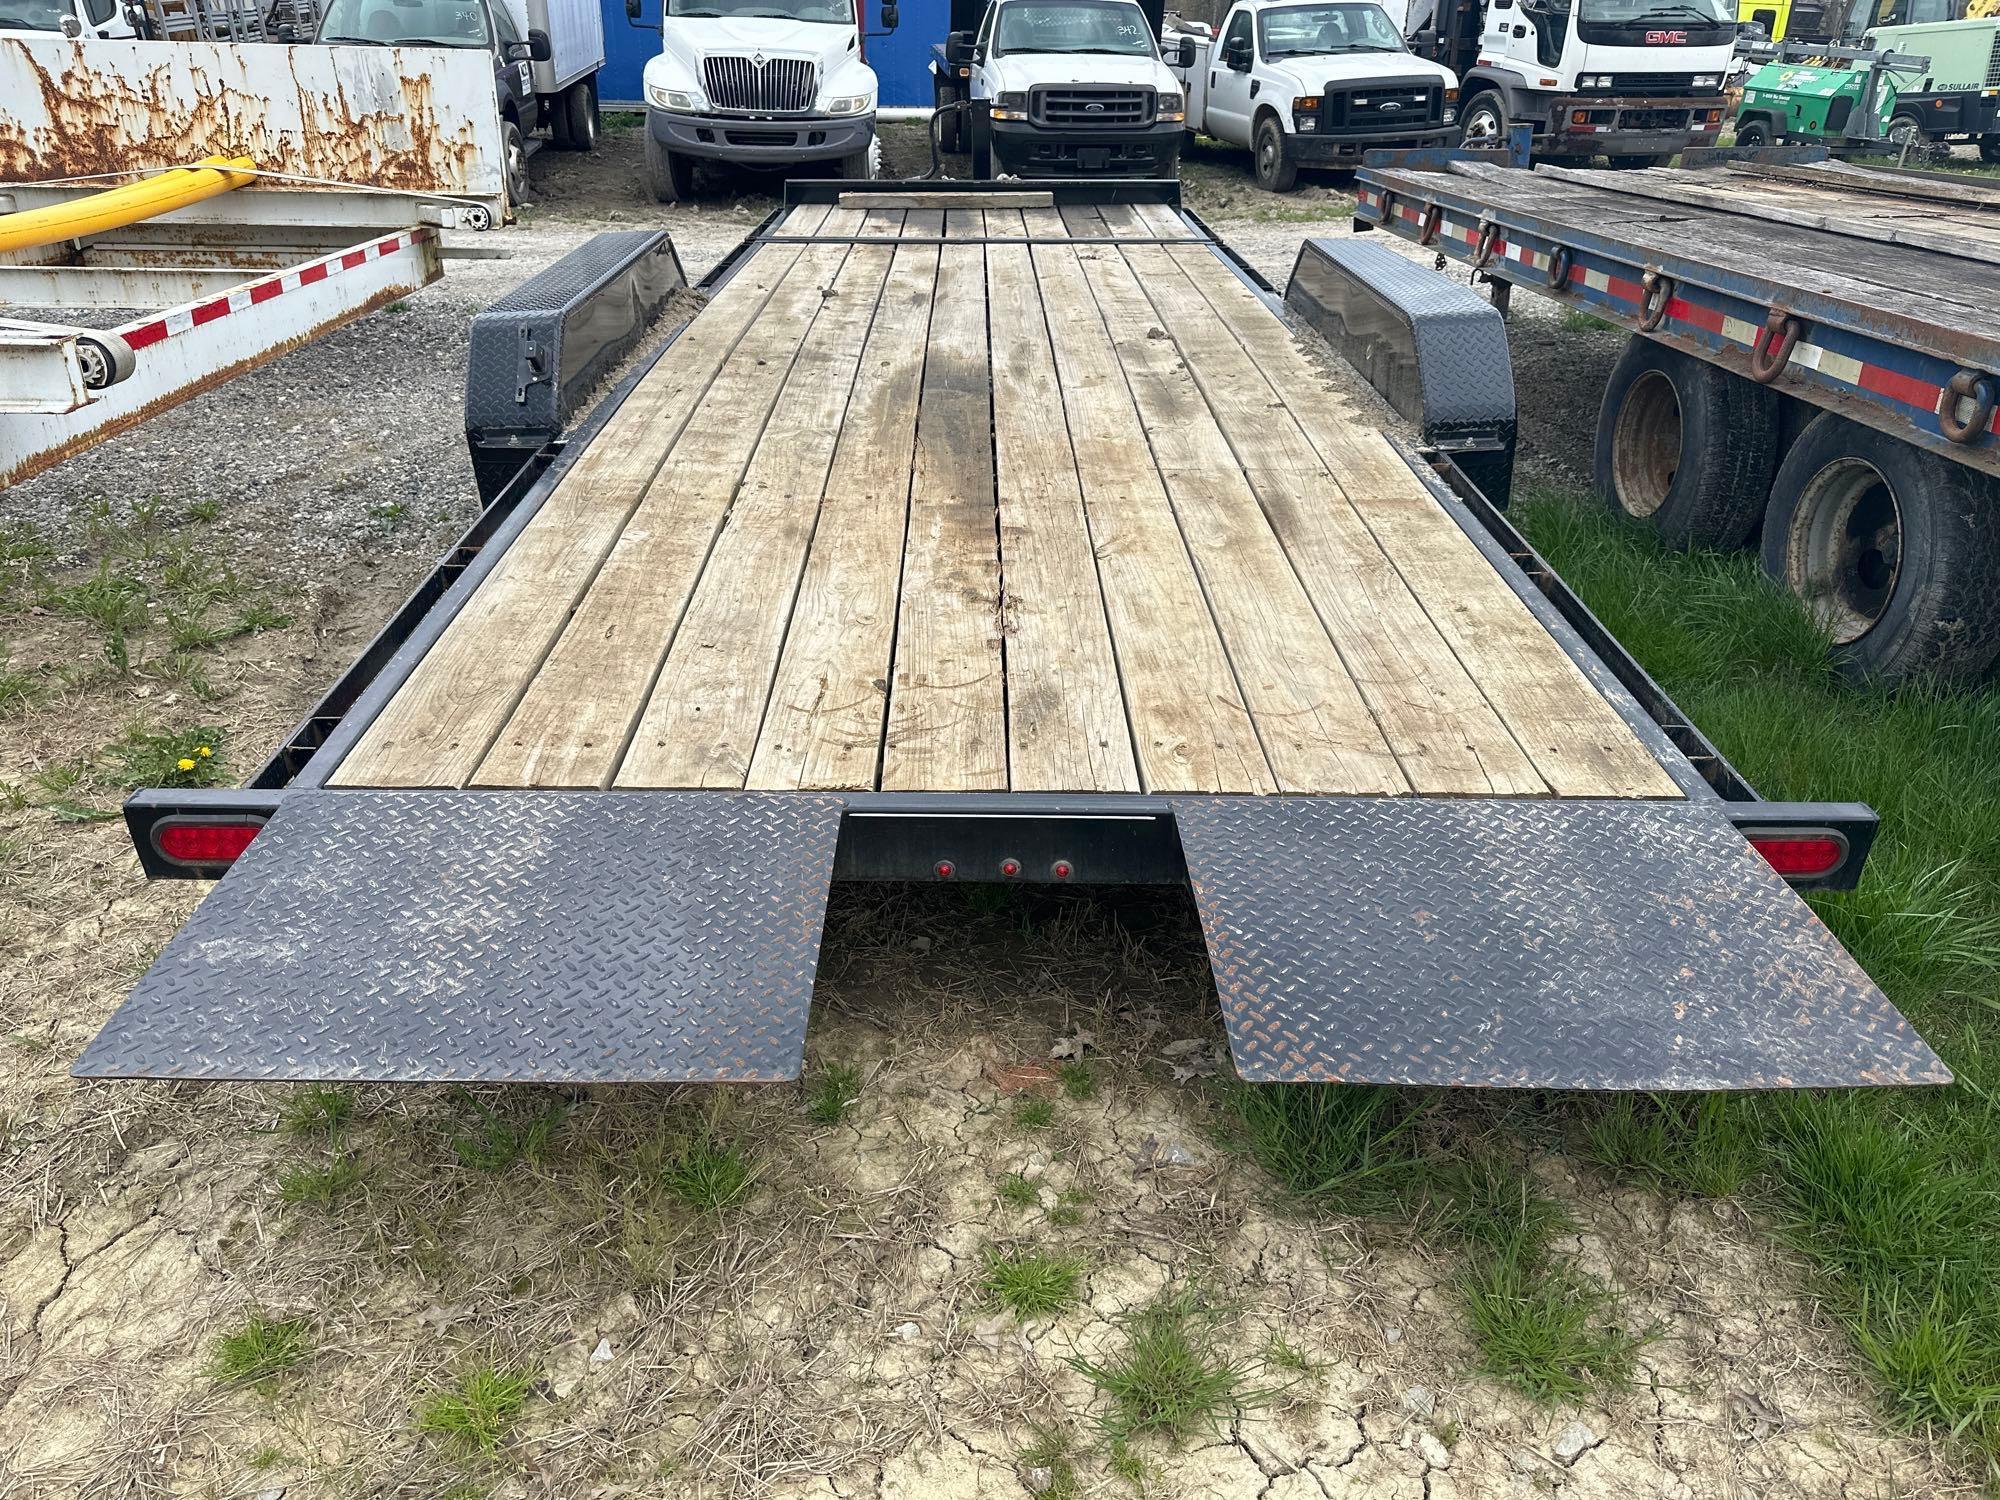 2022 DELTA TAGALONG TRAILER VN:056295 equipped with 7 ton capacity, tilt top, tandem axle. BILL OF